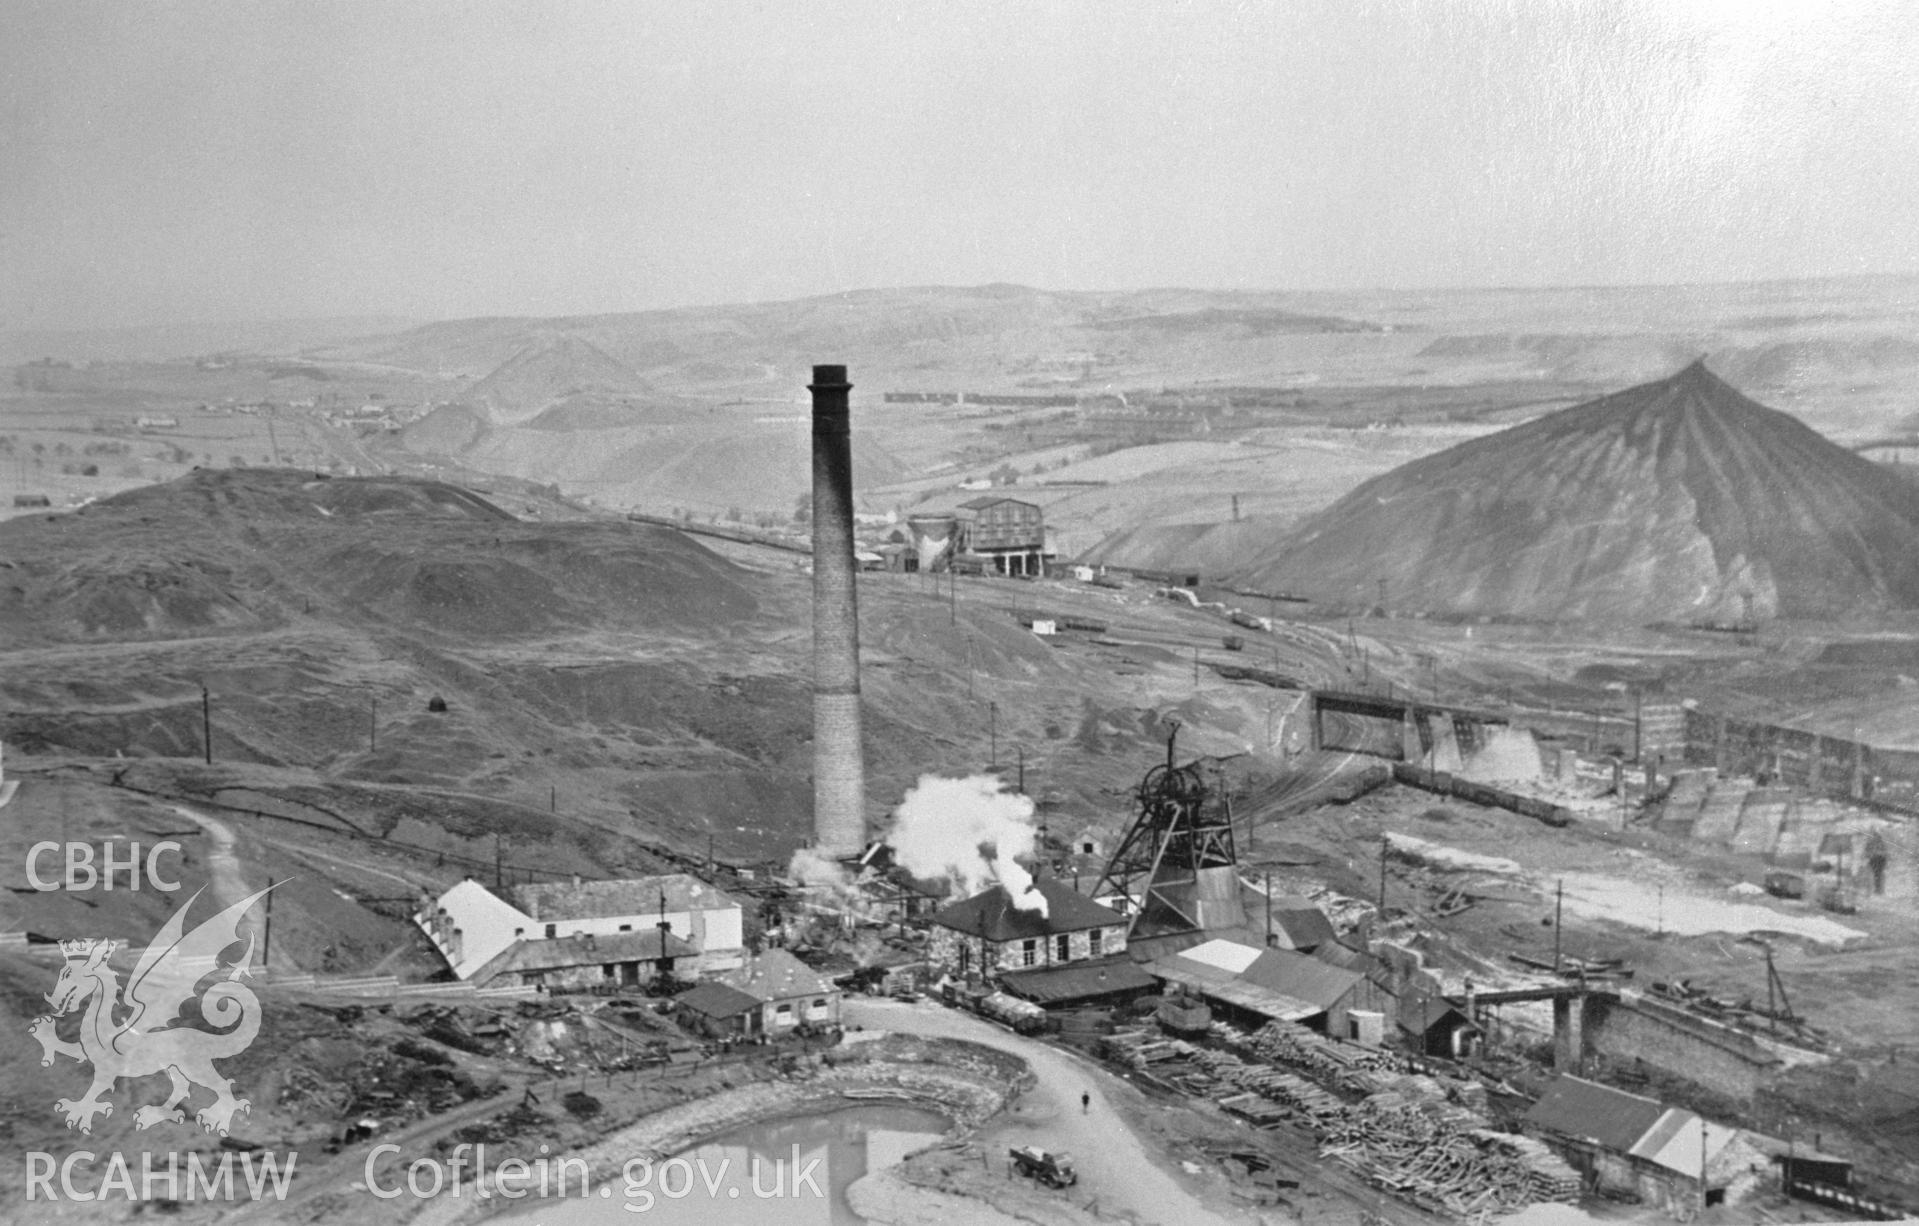 Digital copy of an acetate negative showing general view of Big Pit, from the John Cornwell Collection.